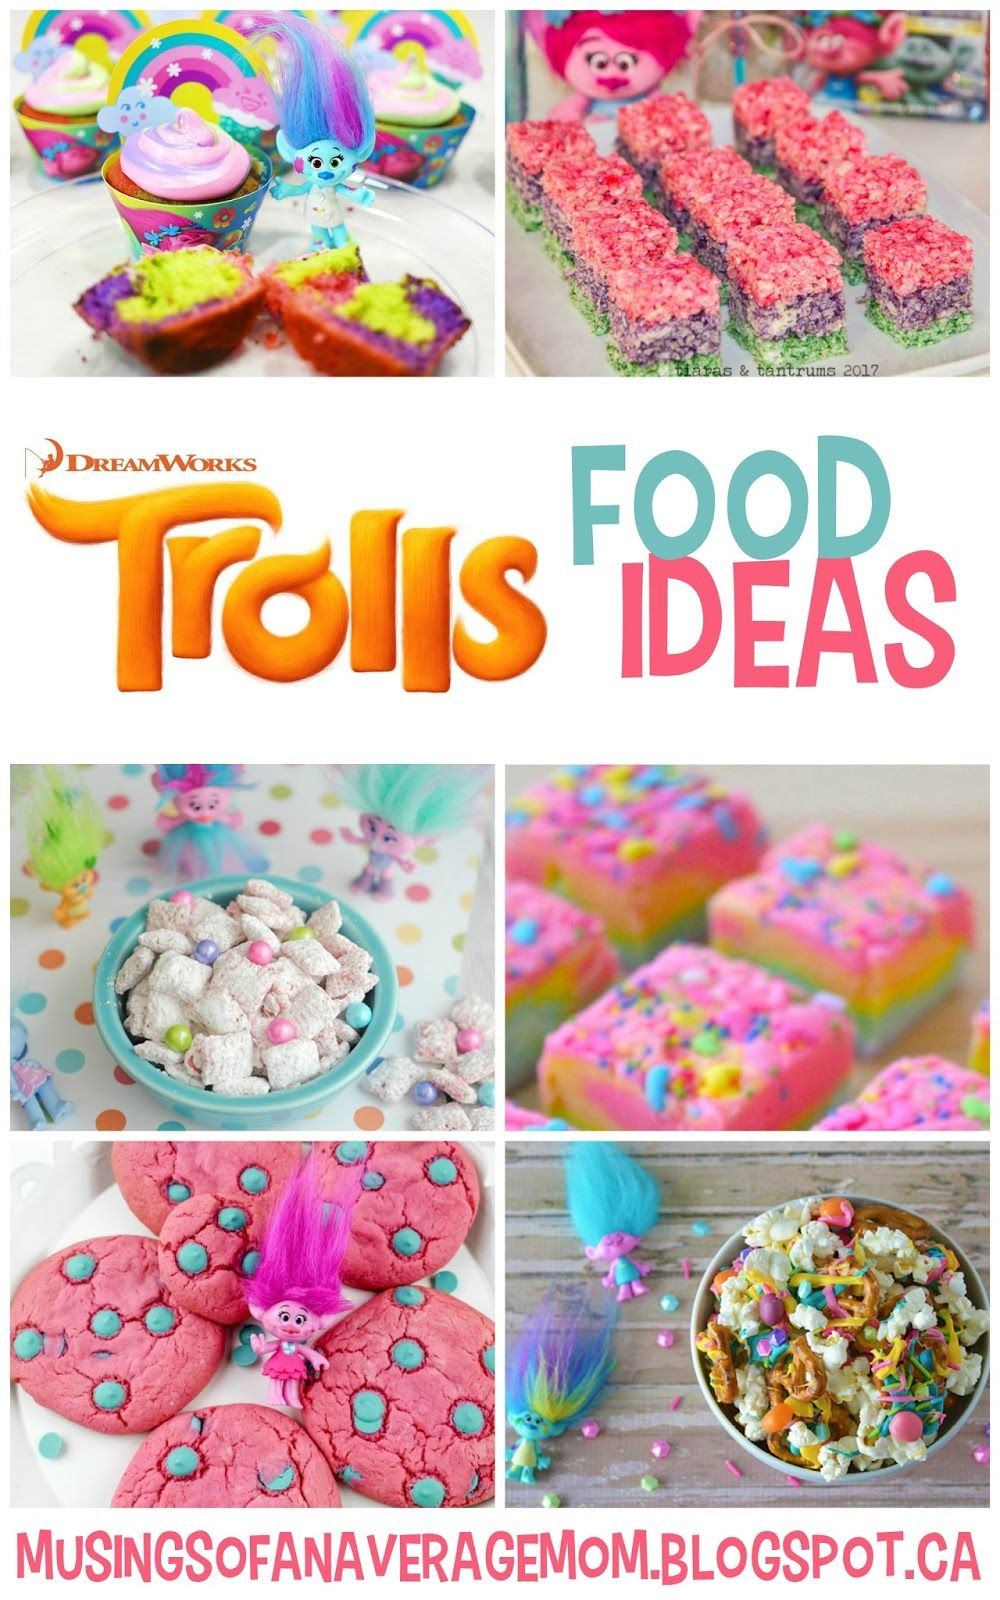 Trolls Birthday Party Ideas For Food
 Everything You Need for a Trolls Party